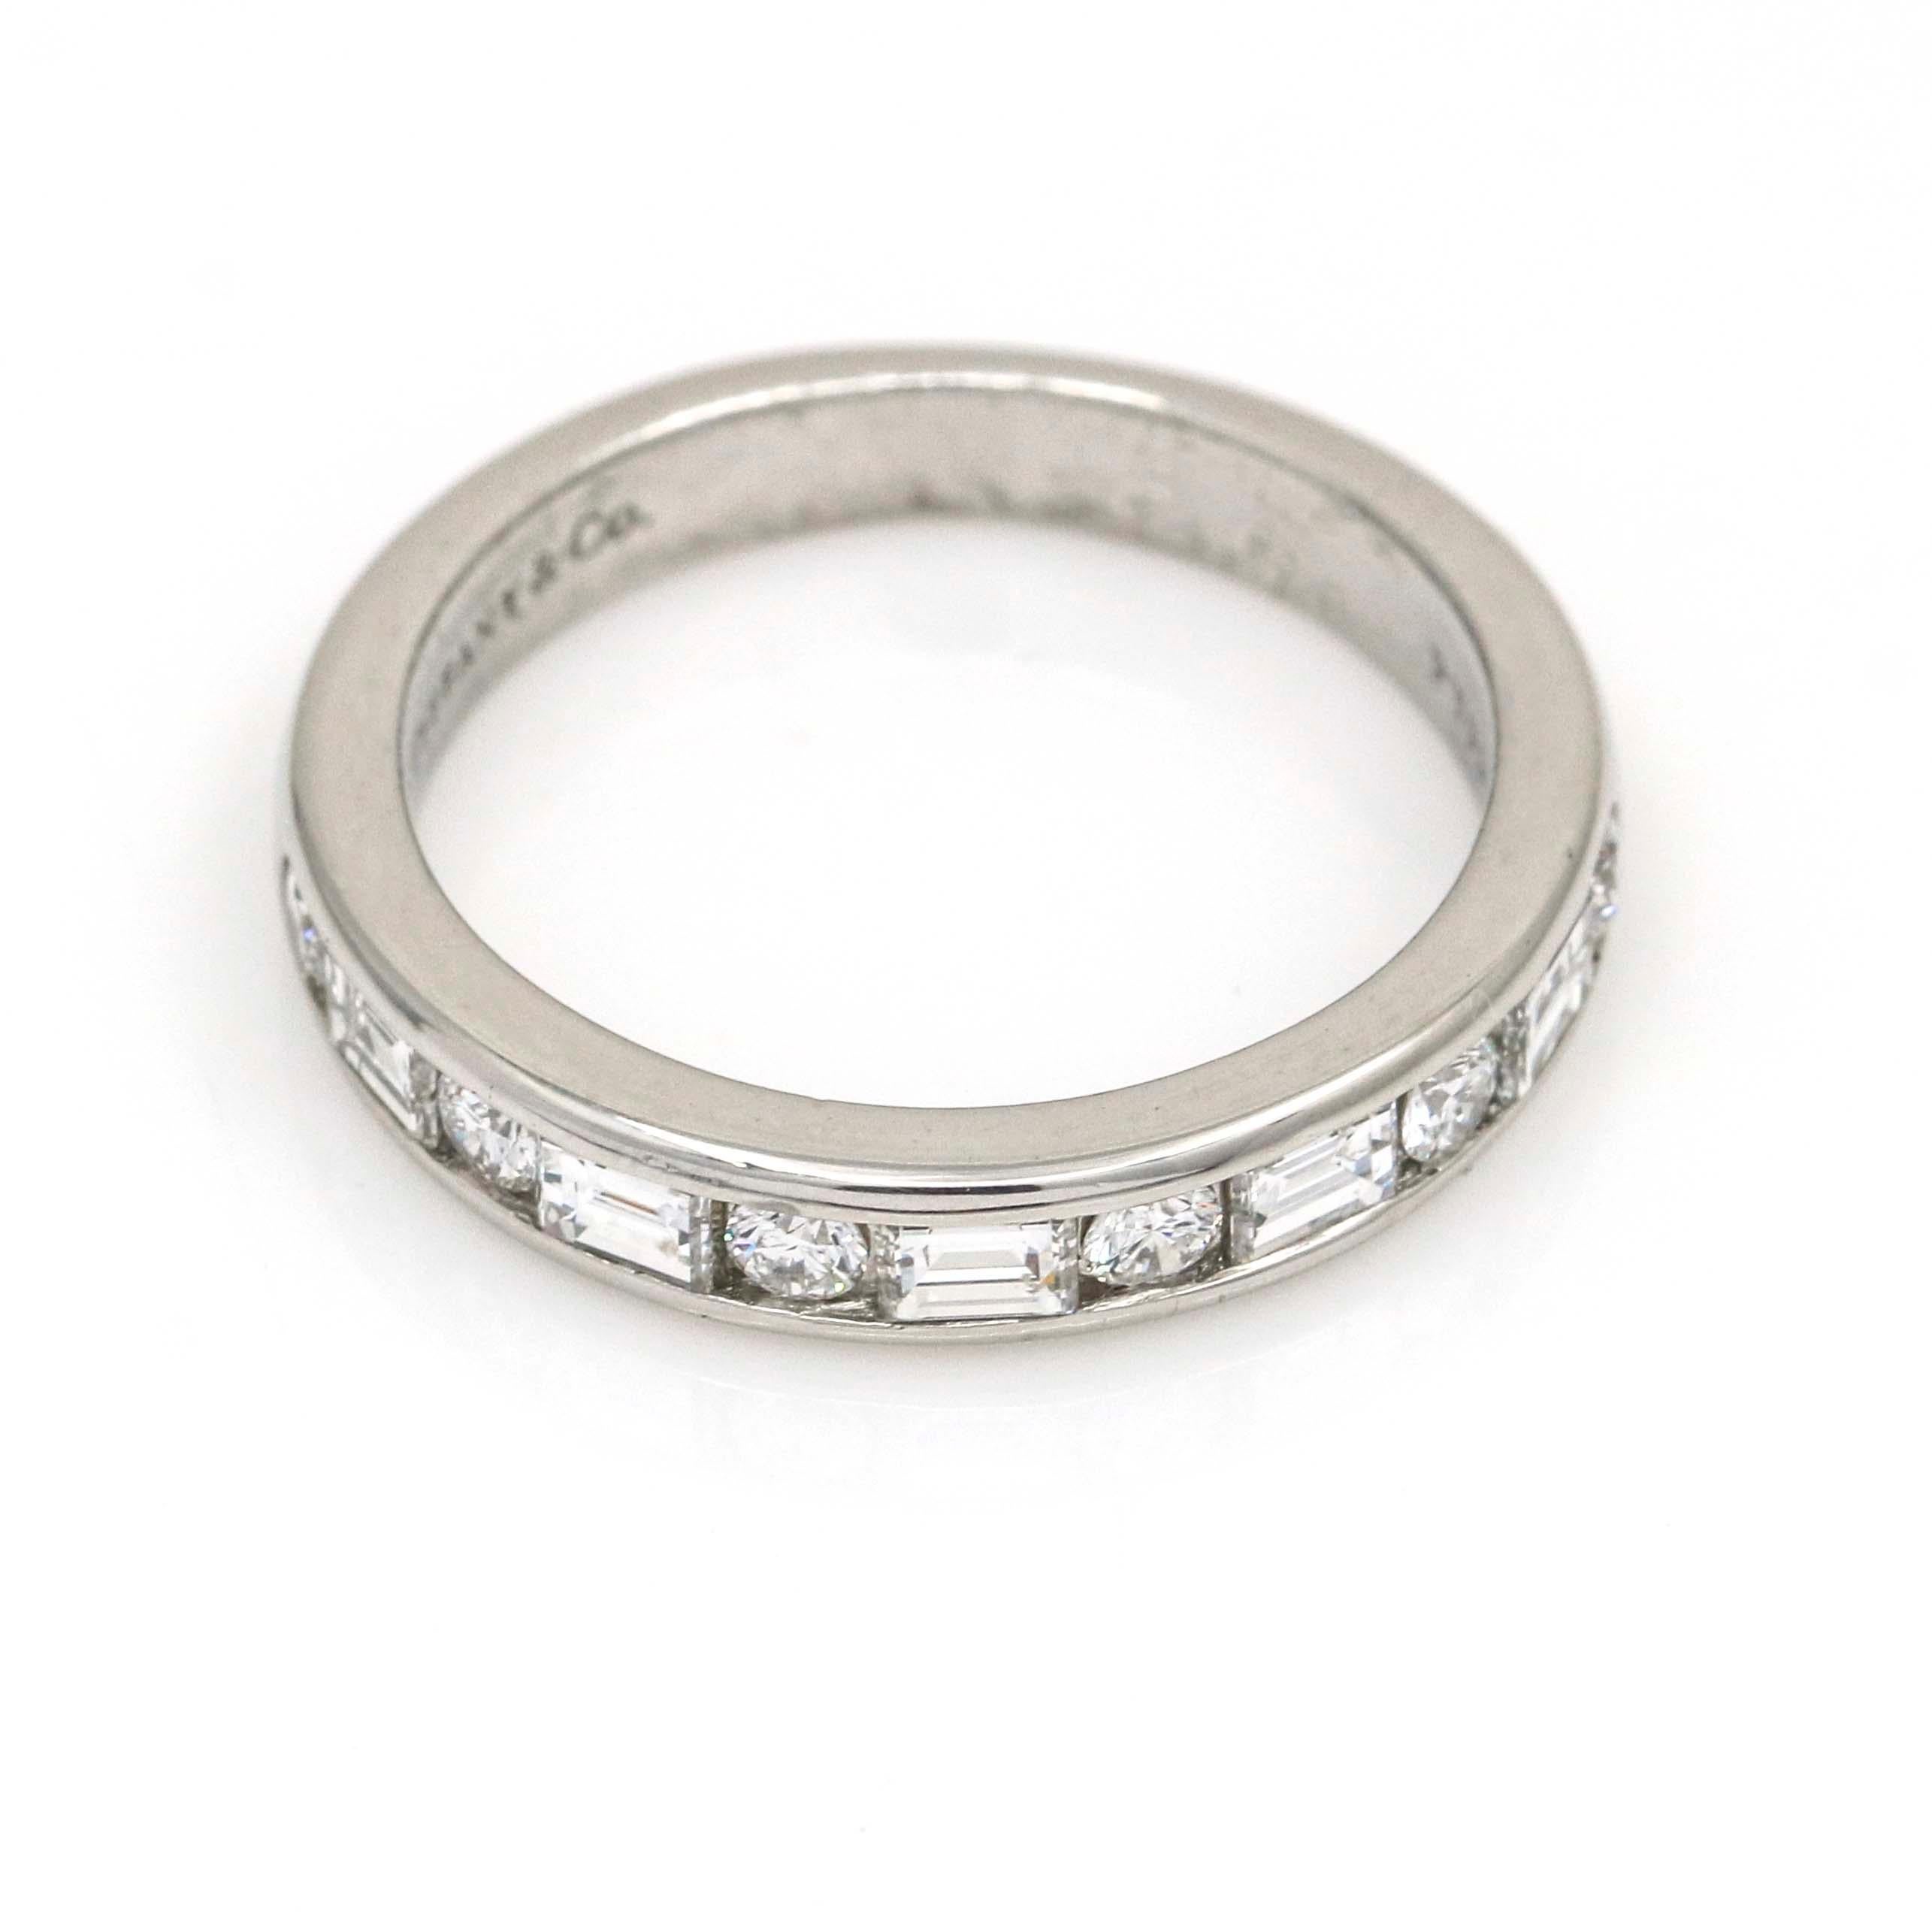 Tiffany and Co. women's half eternity band featuring 11 channel set brilliant round and baguette-cut diamonds crafted in platinum. Adaptable, timeless design perfect for wedding, anniversary band, or stackable ring. Inside shank marked Tiffany & Co.